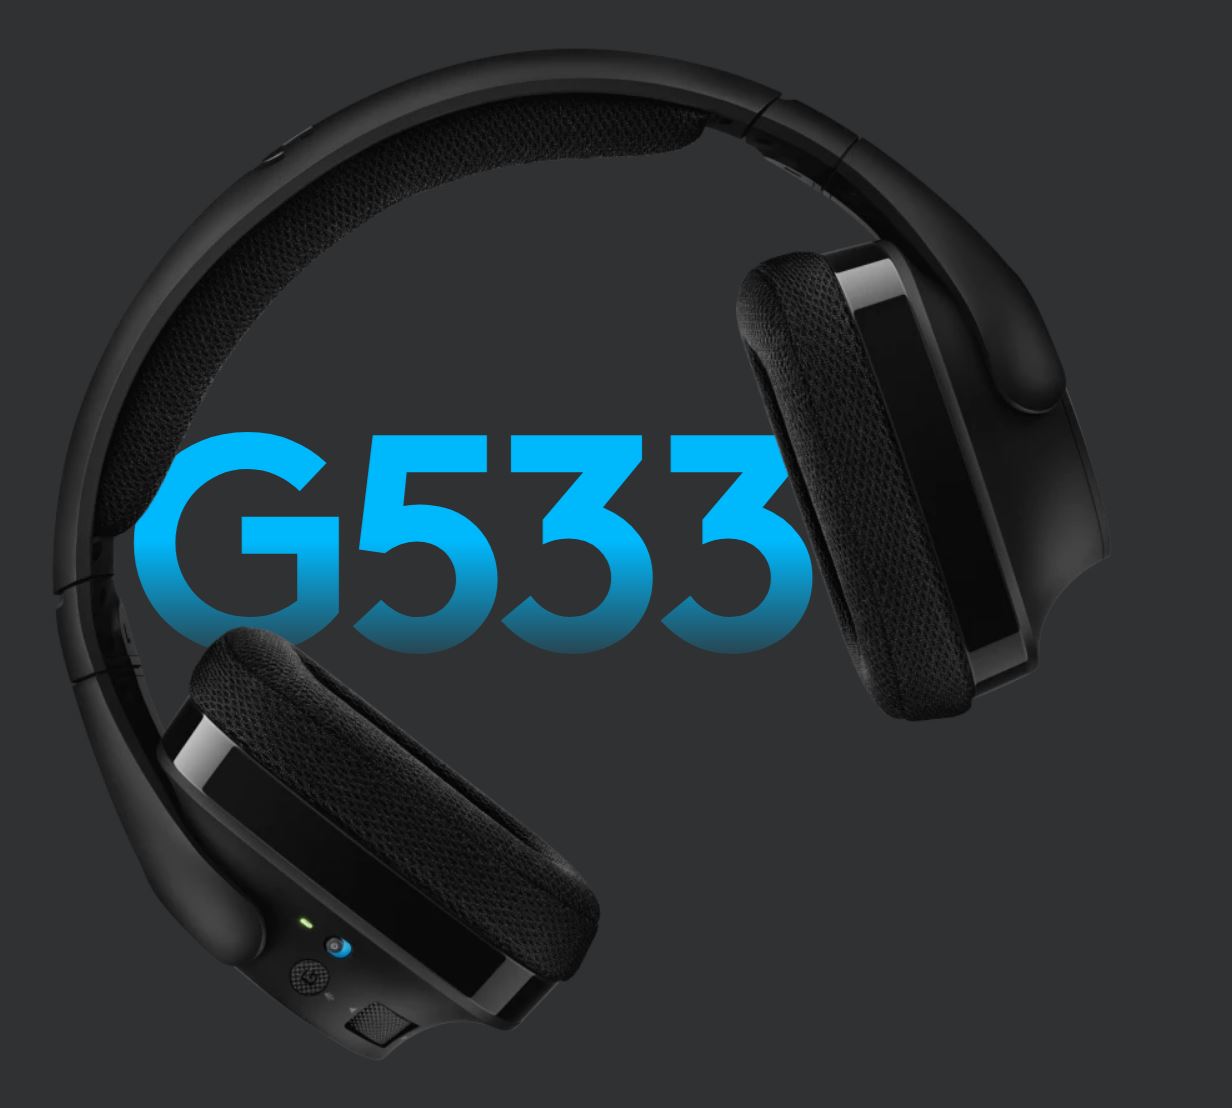 Logitech G533 DTS Headphone:X 7.1 Wireless Surround Gaming Headset Pro-G™ Audio Gaming Performance 15 Hour Battery Life Noise-Cancelling